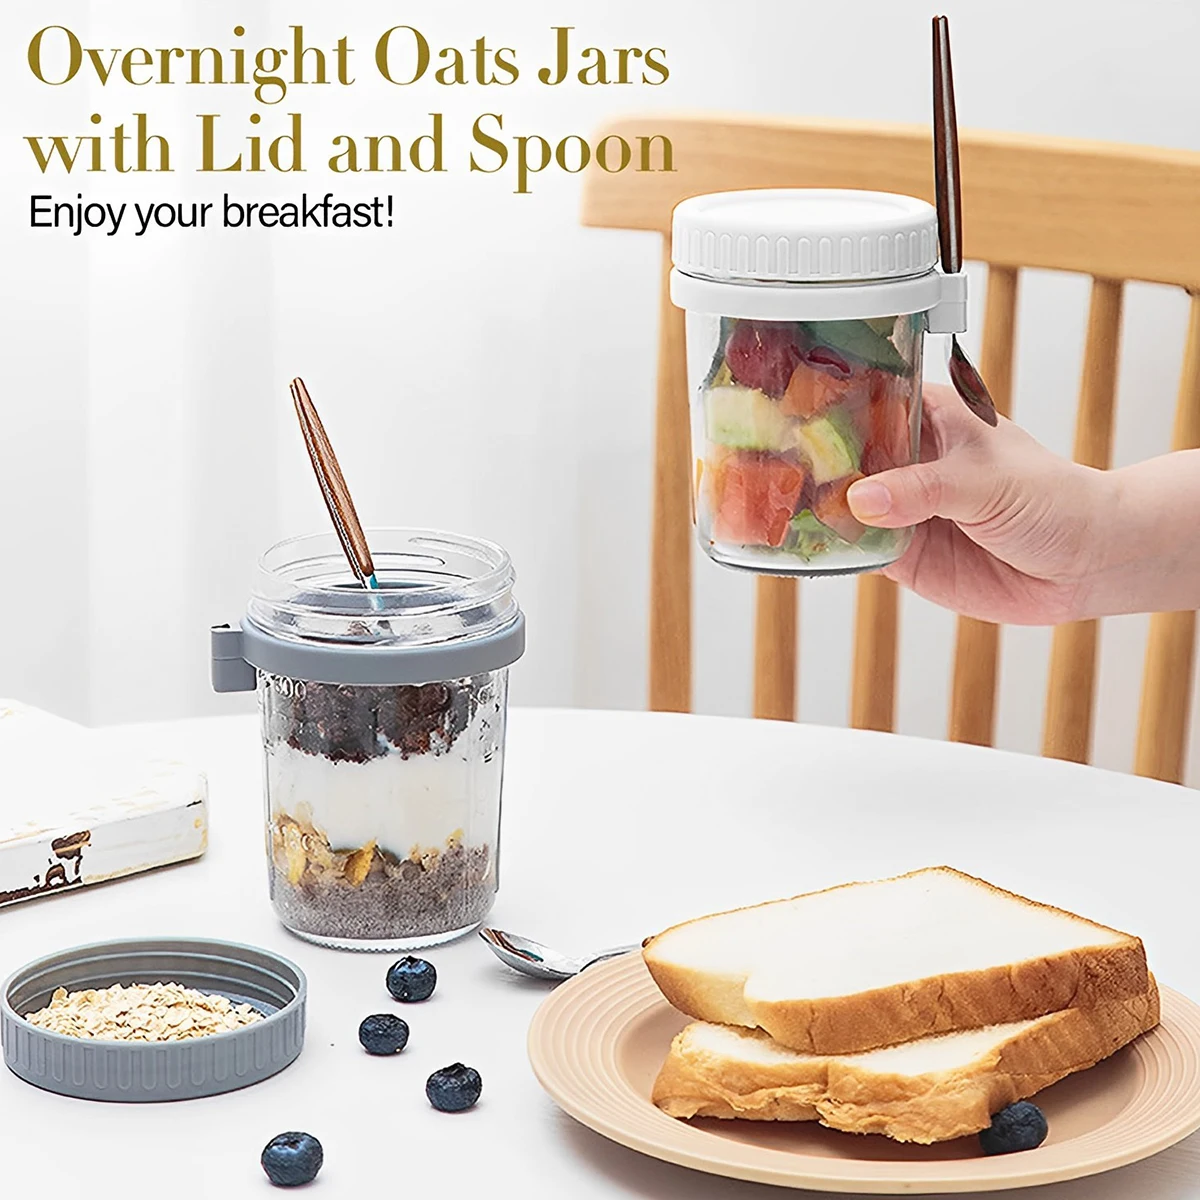 https://ae01.alicdn.com/kf/S087a61c2086f47d3b6d0176ed7064dd36/Oatmeal-Cup-Overnight-Oats-Jars-Breakfast-Cup-with-Lid-and-Spoon-Wide-Mouth-Mason-Jars-Oatmeal.jpg